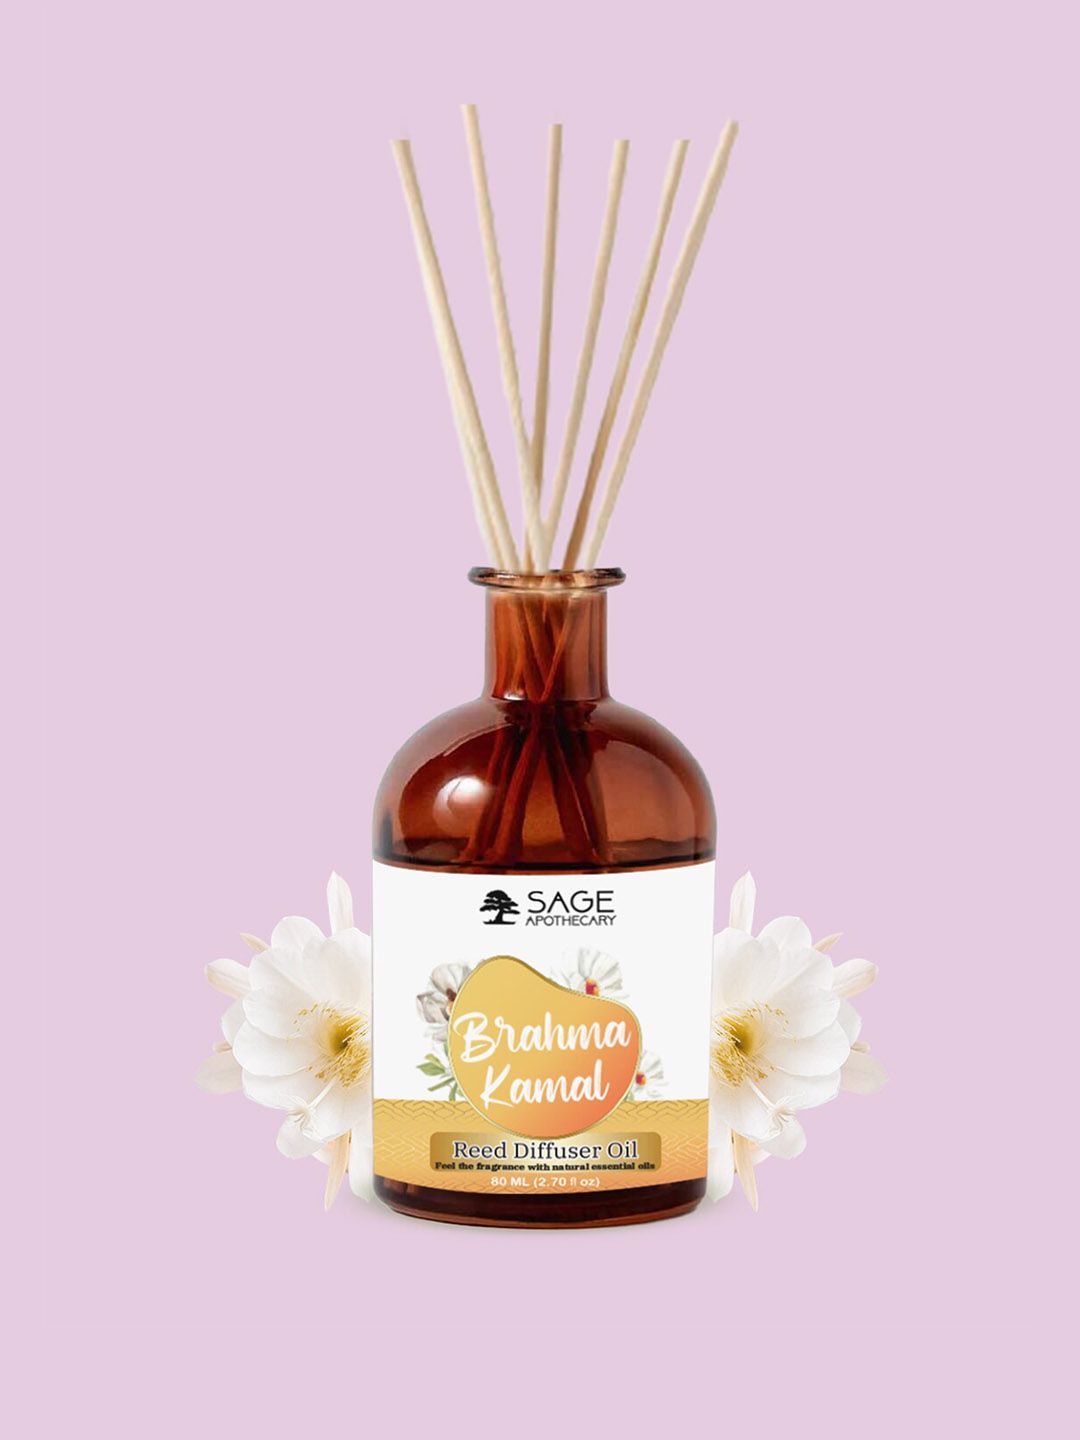 SAGE APOTHECARY Brahma Kamal Reed Diffuser Oil For Aromatherapy 80 ml Price in India